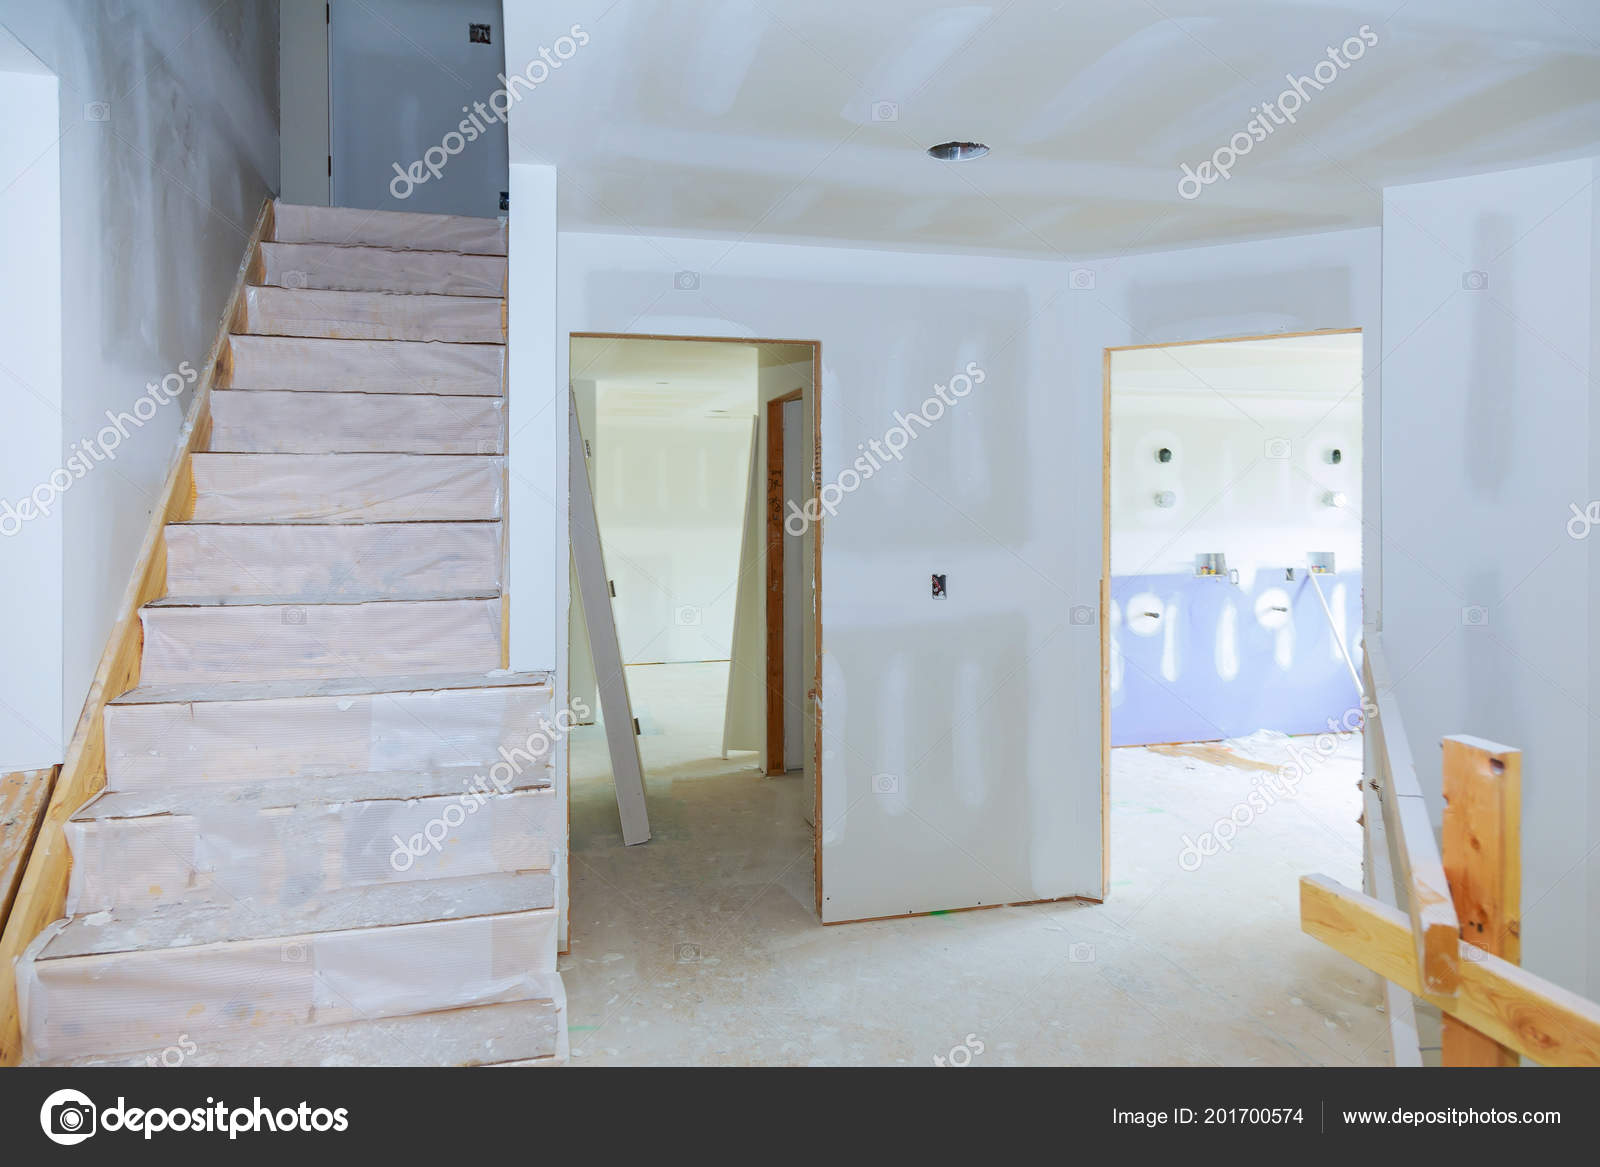 Gypsum Board Ceiling Construction Interior House Alterations